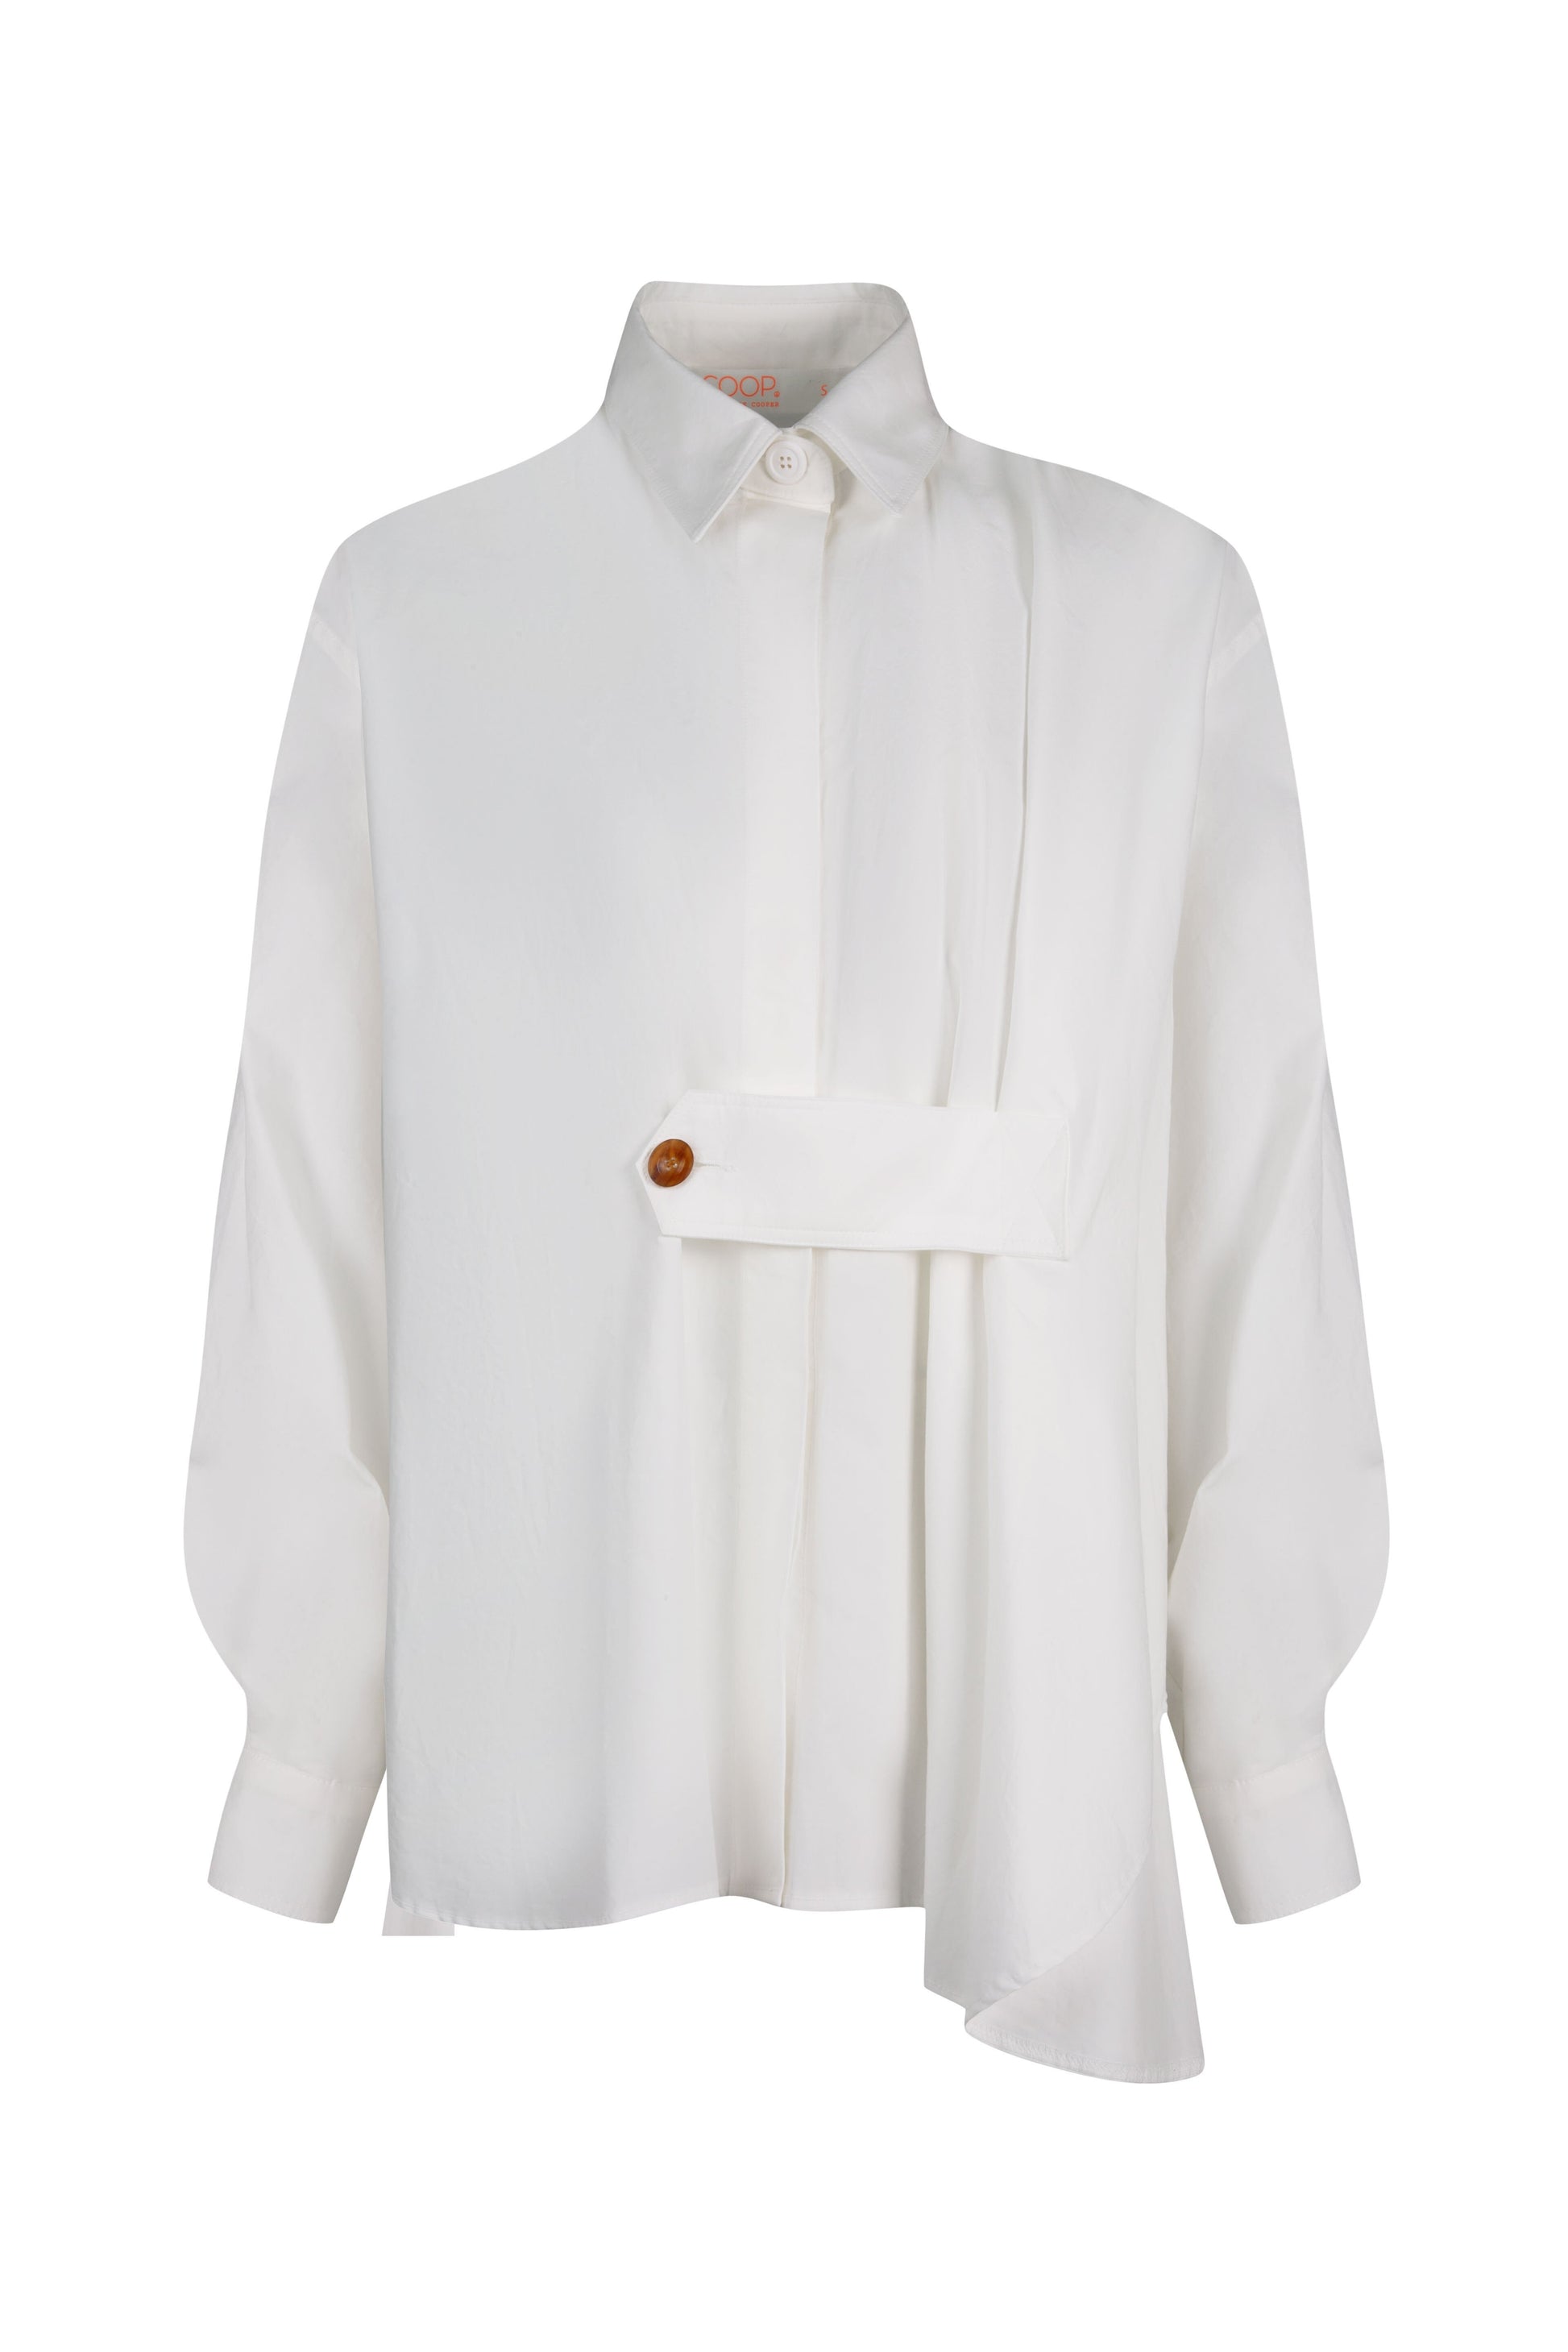 COOP DOWN & SHIRTY SHIRT - WHITE - THE VOGUE STORE